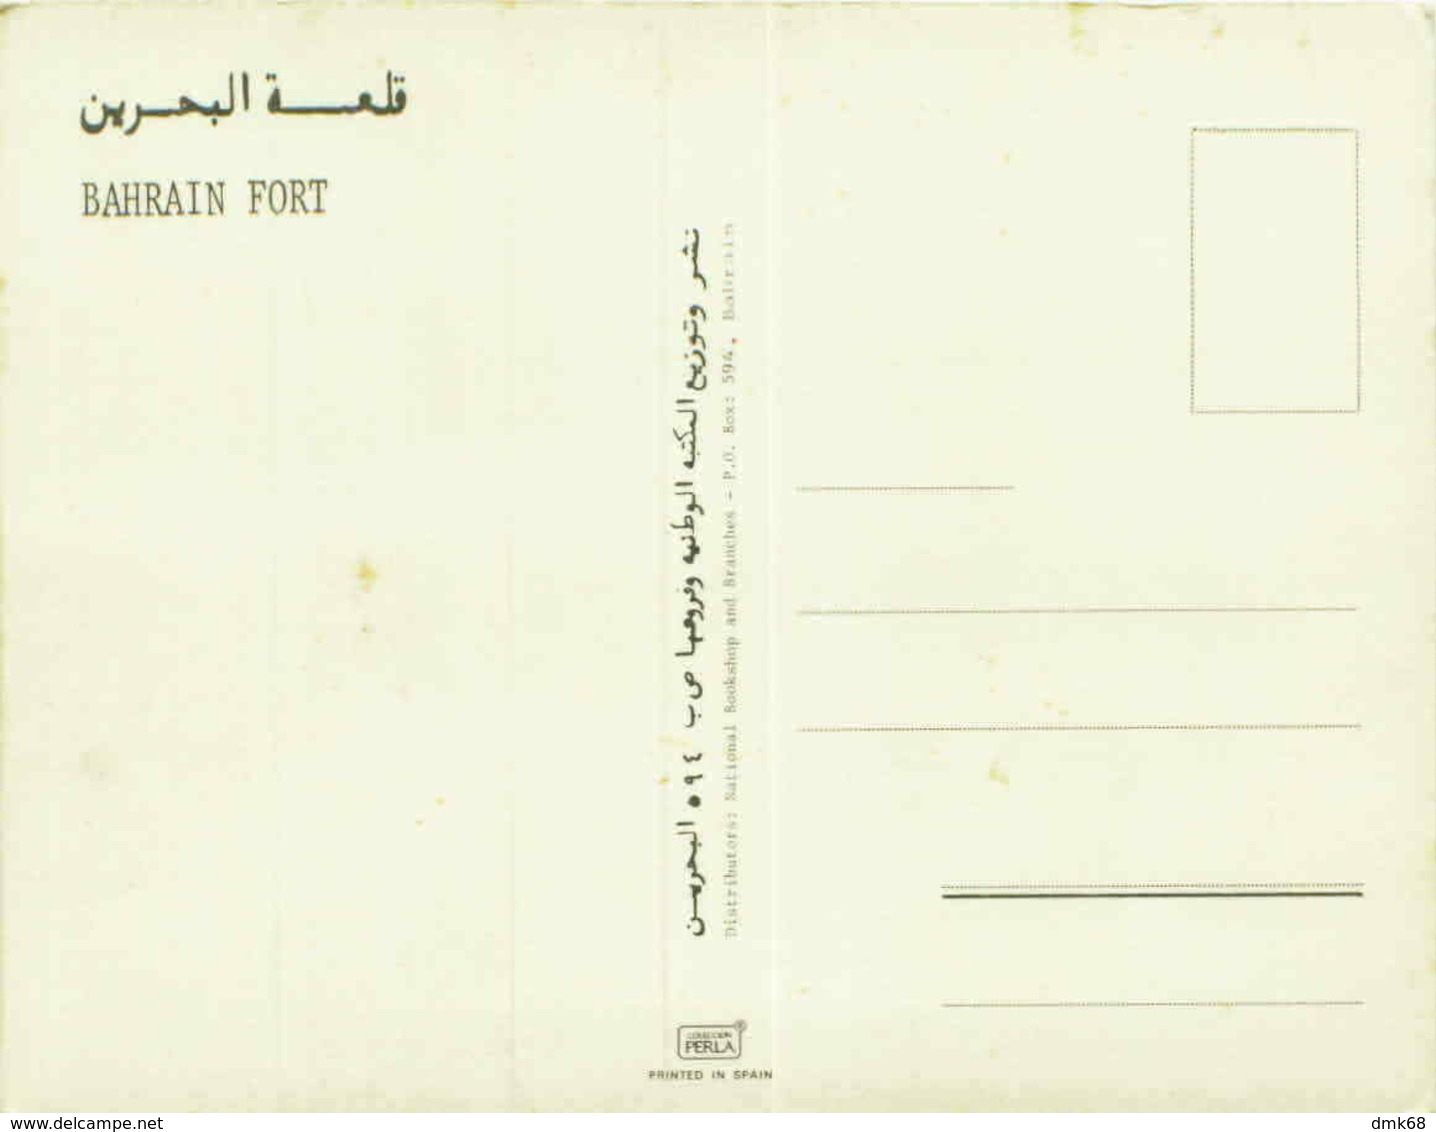 BAHRAIN FORT - BY NATIONAL BOOKSHOP AND BRANCHES - 1960s/70s (BG2582) - Baharain